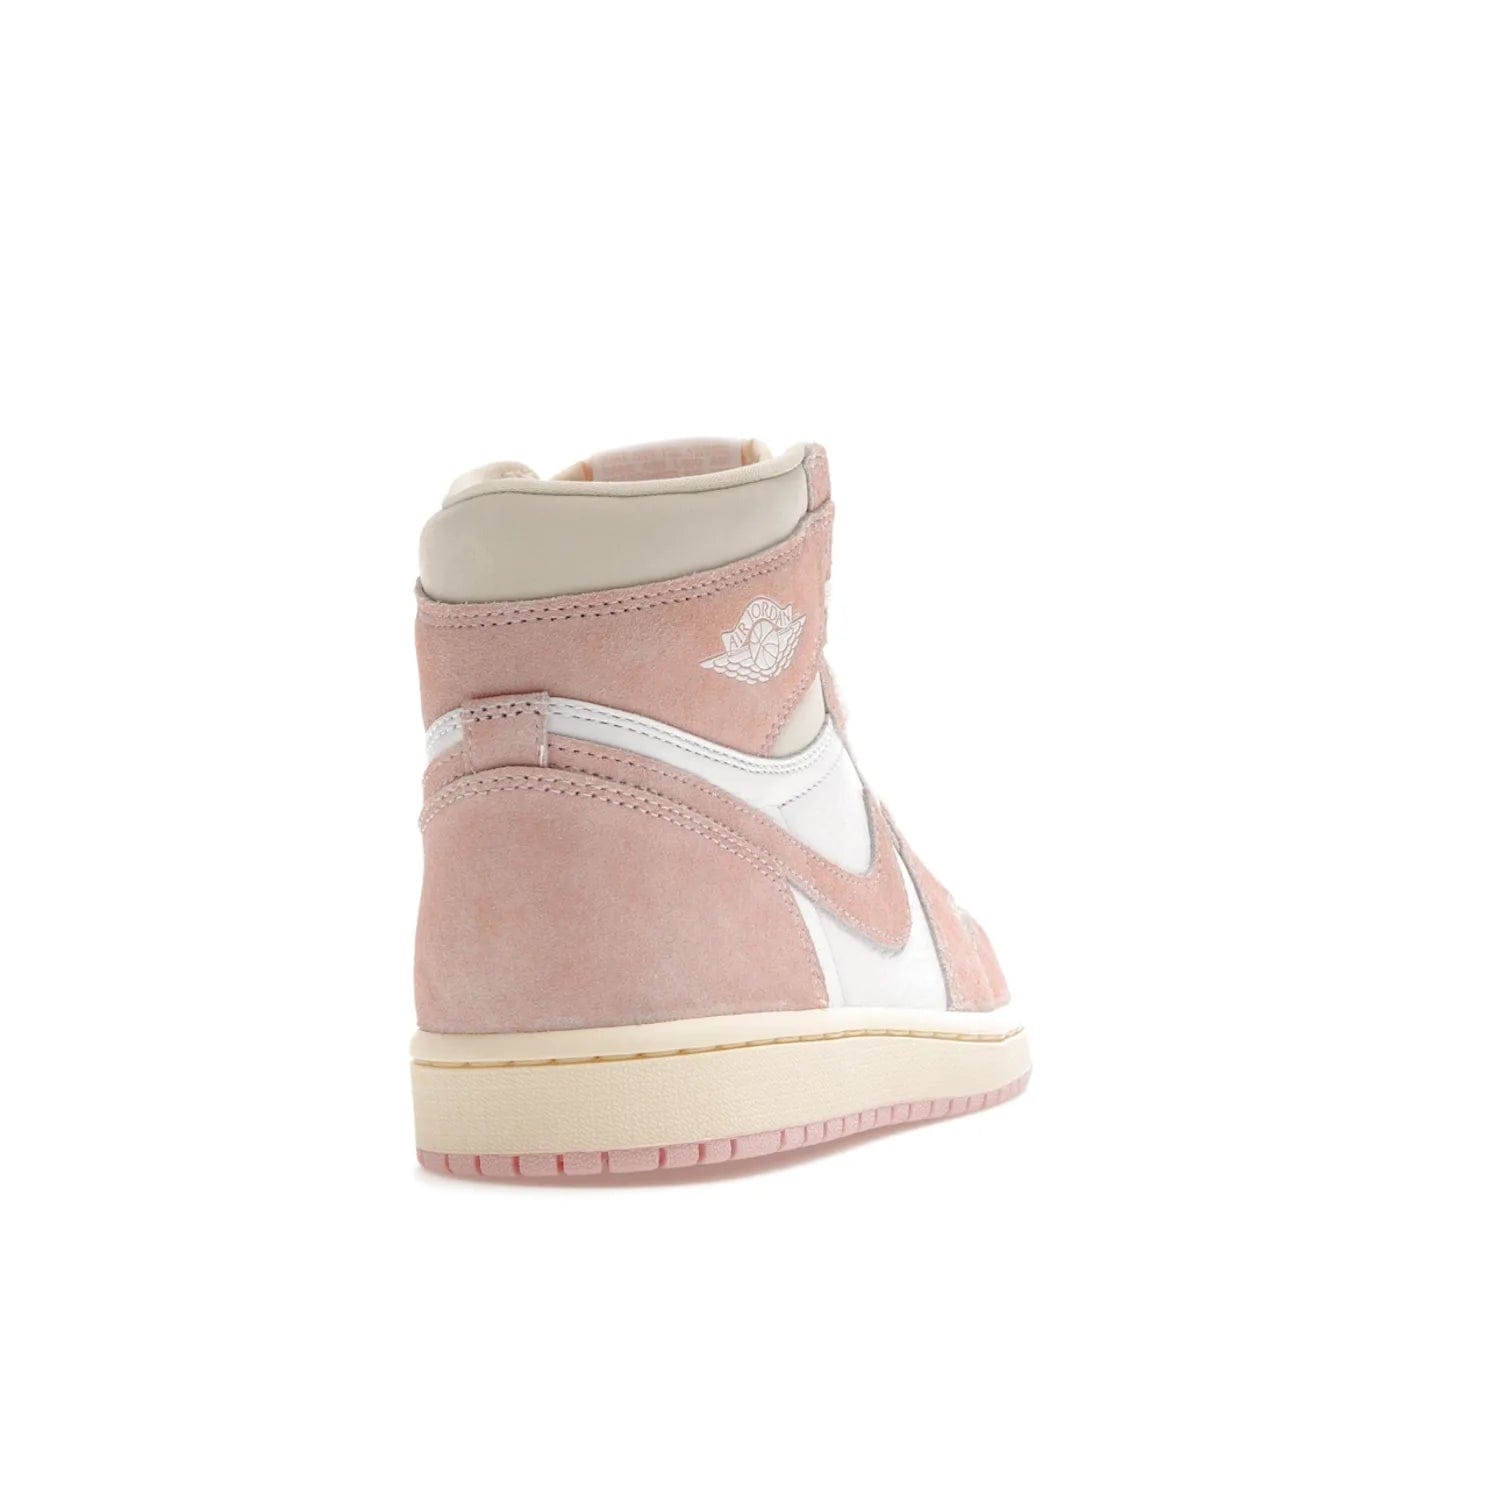 Jordan 1 Retro High OG Washed Pink (Women's) - Image 30 - Only at www.BallersClubKickz.com - Iconic Air Jordan 1 Retro High OG for women with unique pink suede and white leather uppers. Get the timeless look on April 22, 2023.